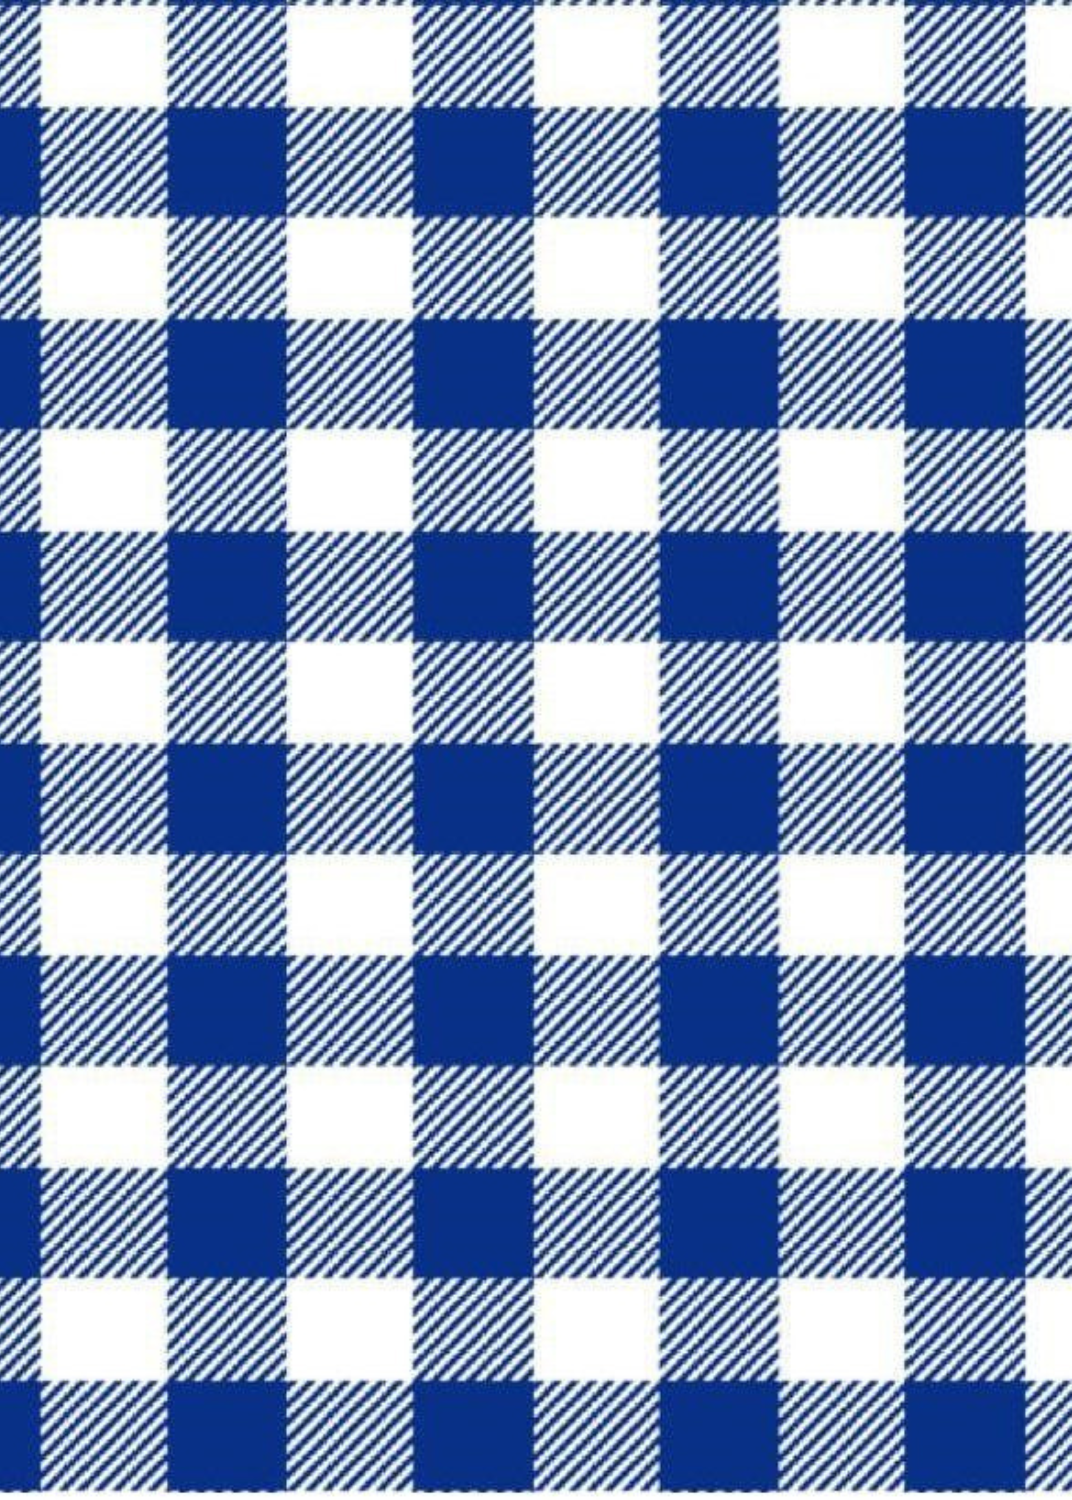 Cricket Top - Gingham Check Blue/White